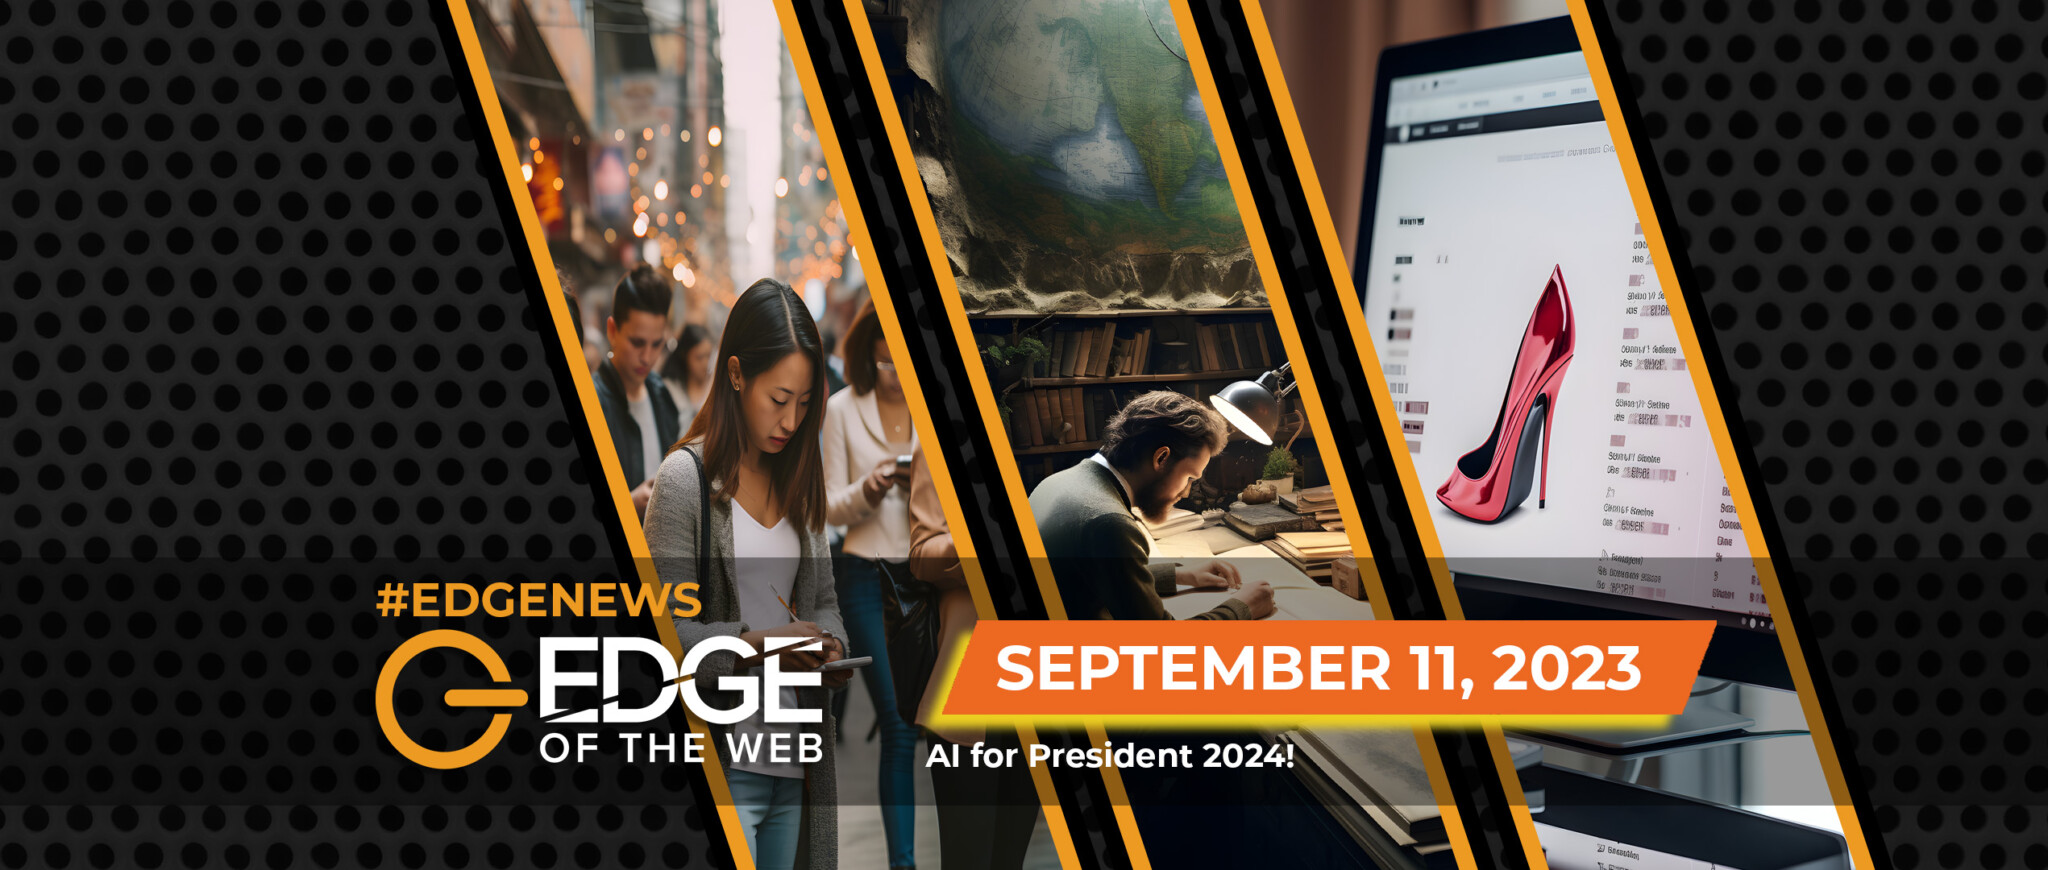 624 | News from the EDGE | Week of 9.11.2023